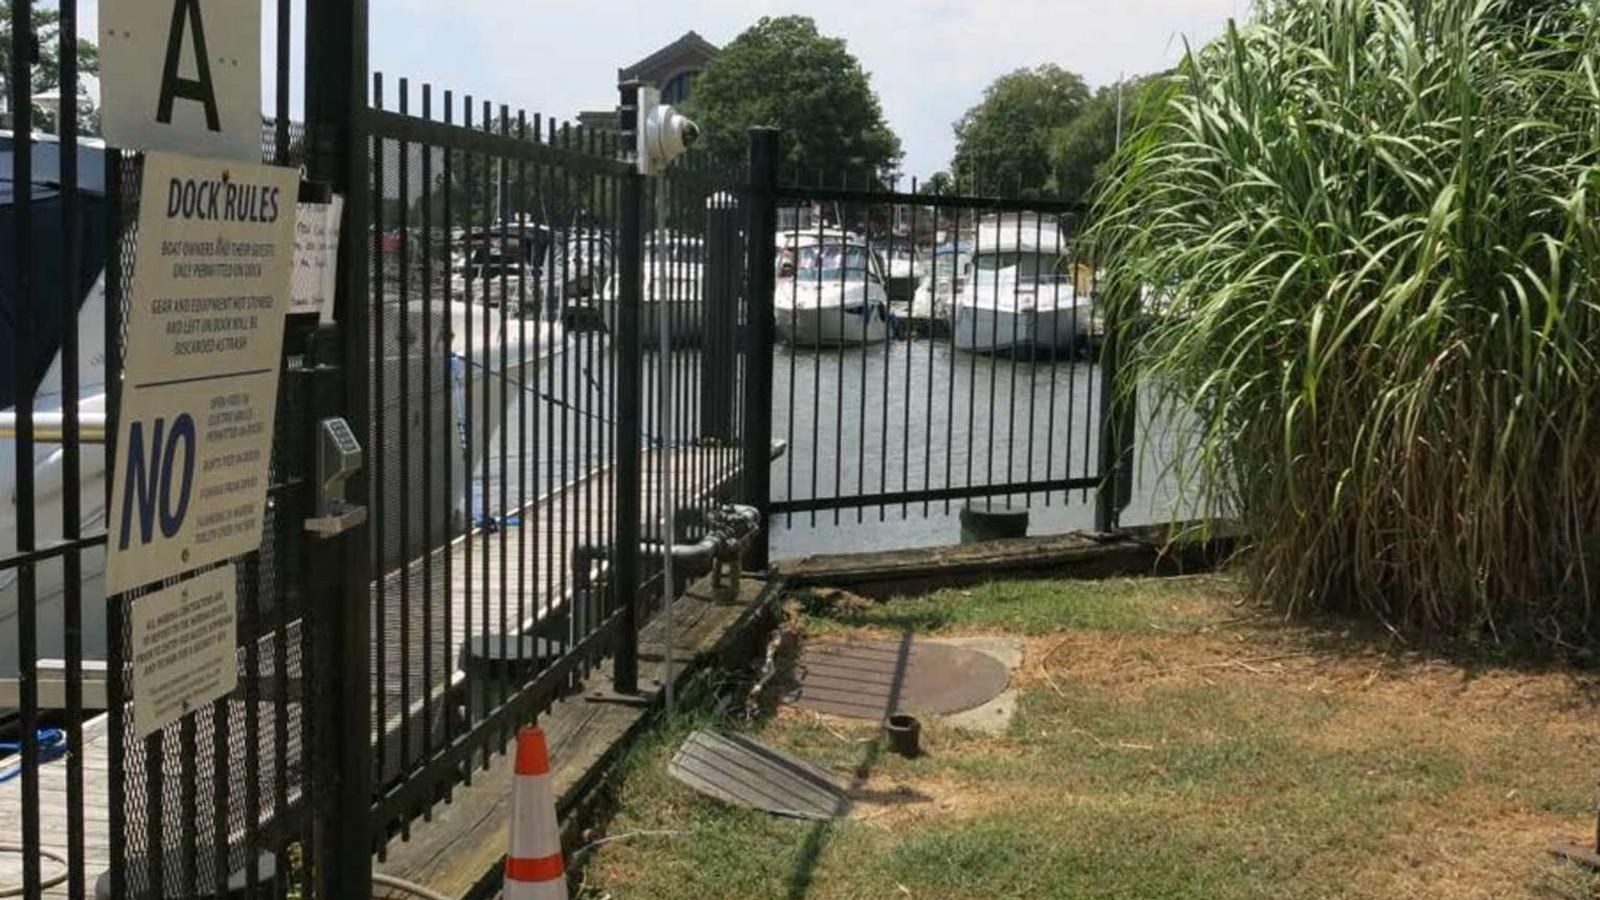 A fence separates a landscaped area from the boat slips